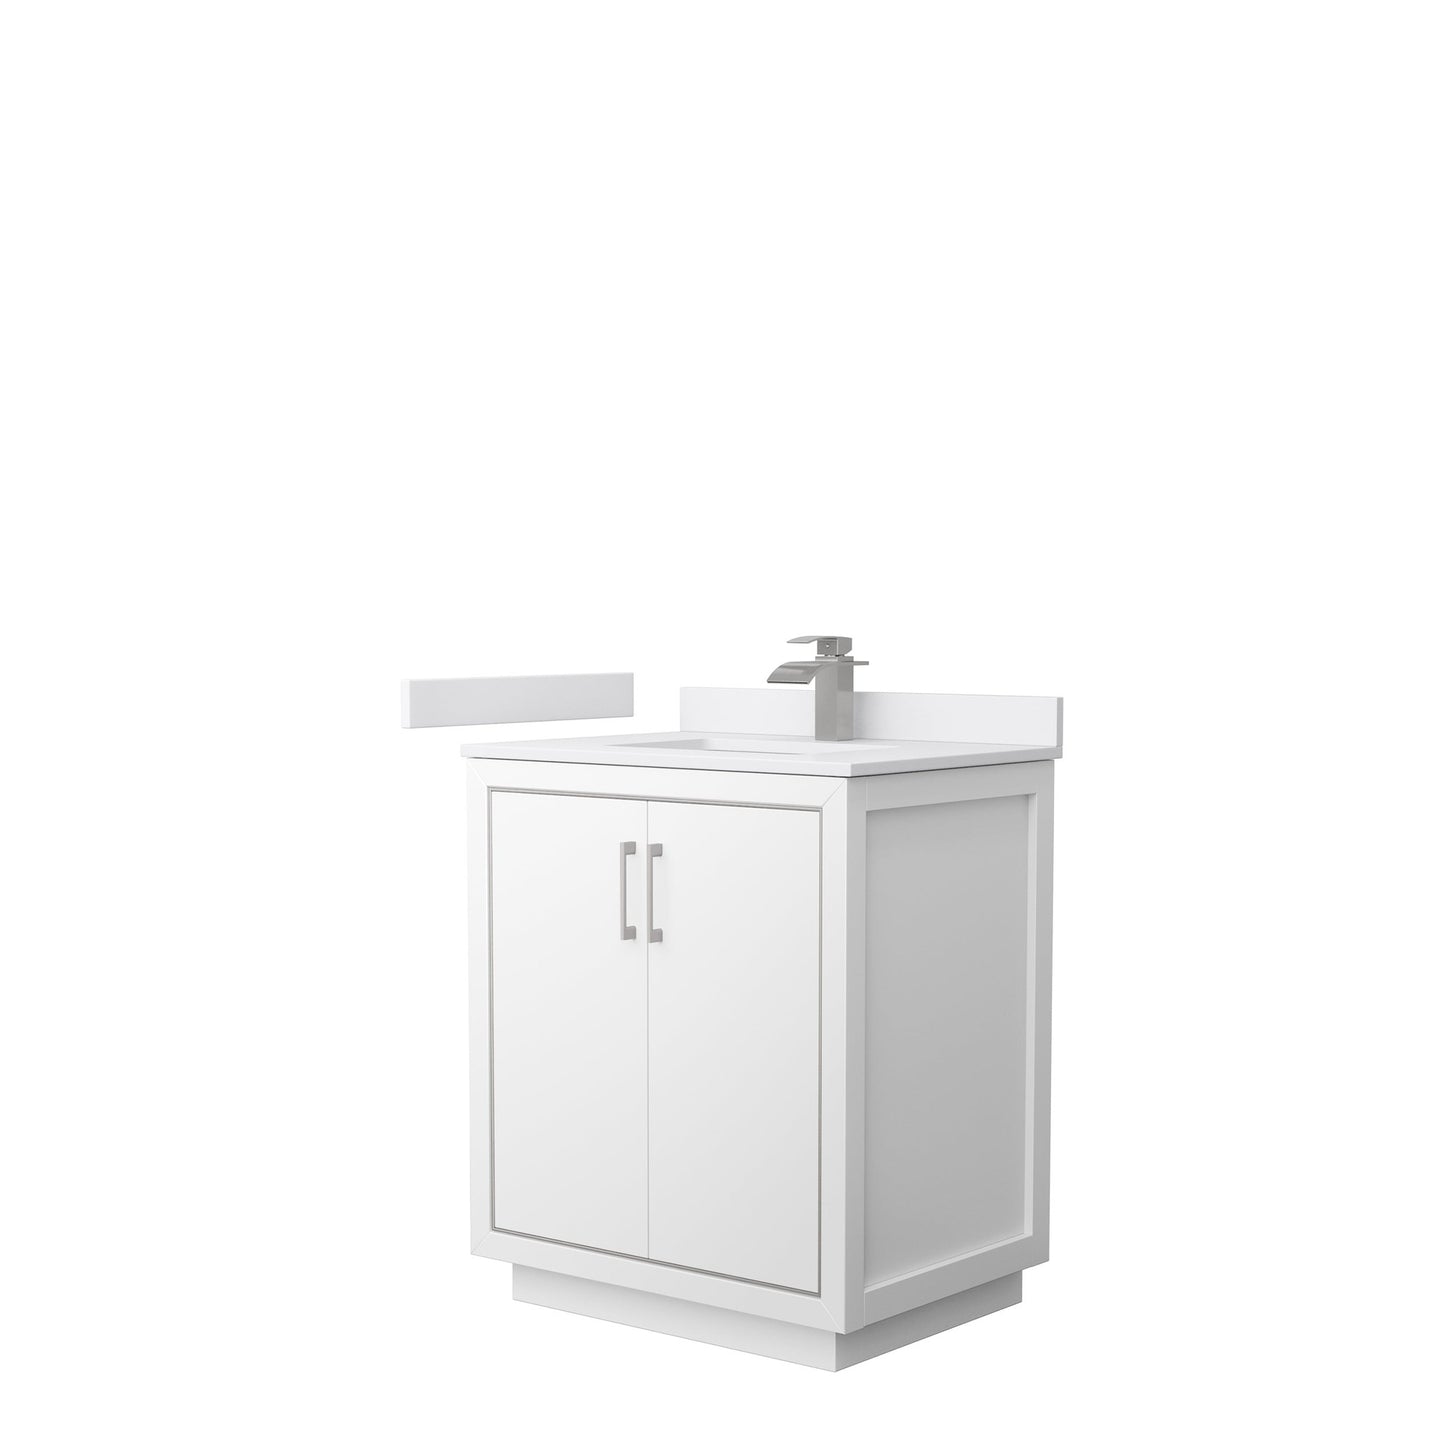 Wyndham Collection Icon 30" Single Bathroom Vanity in White, White Cultured Marble Countertop, Undermount Square Sink, Brushed Nickel Trim